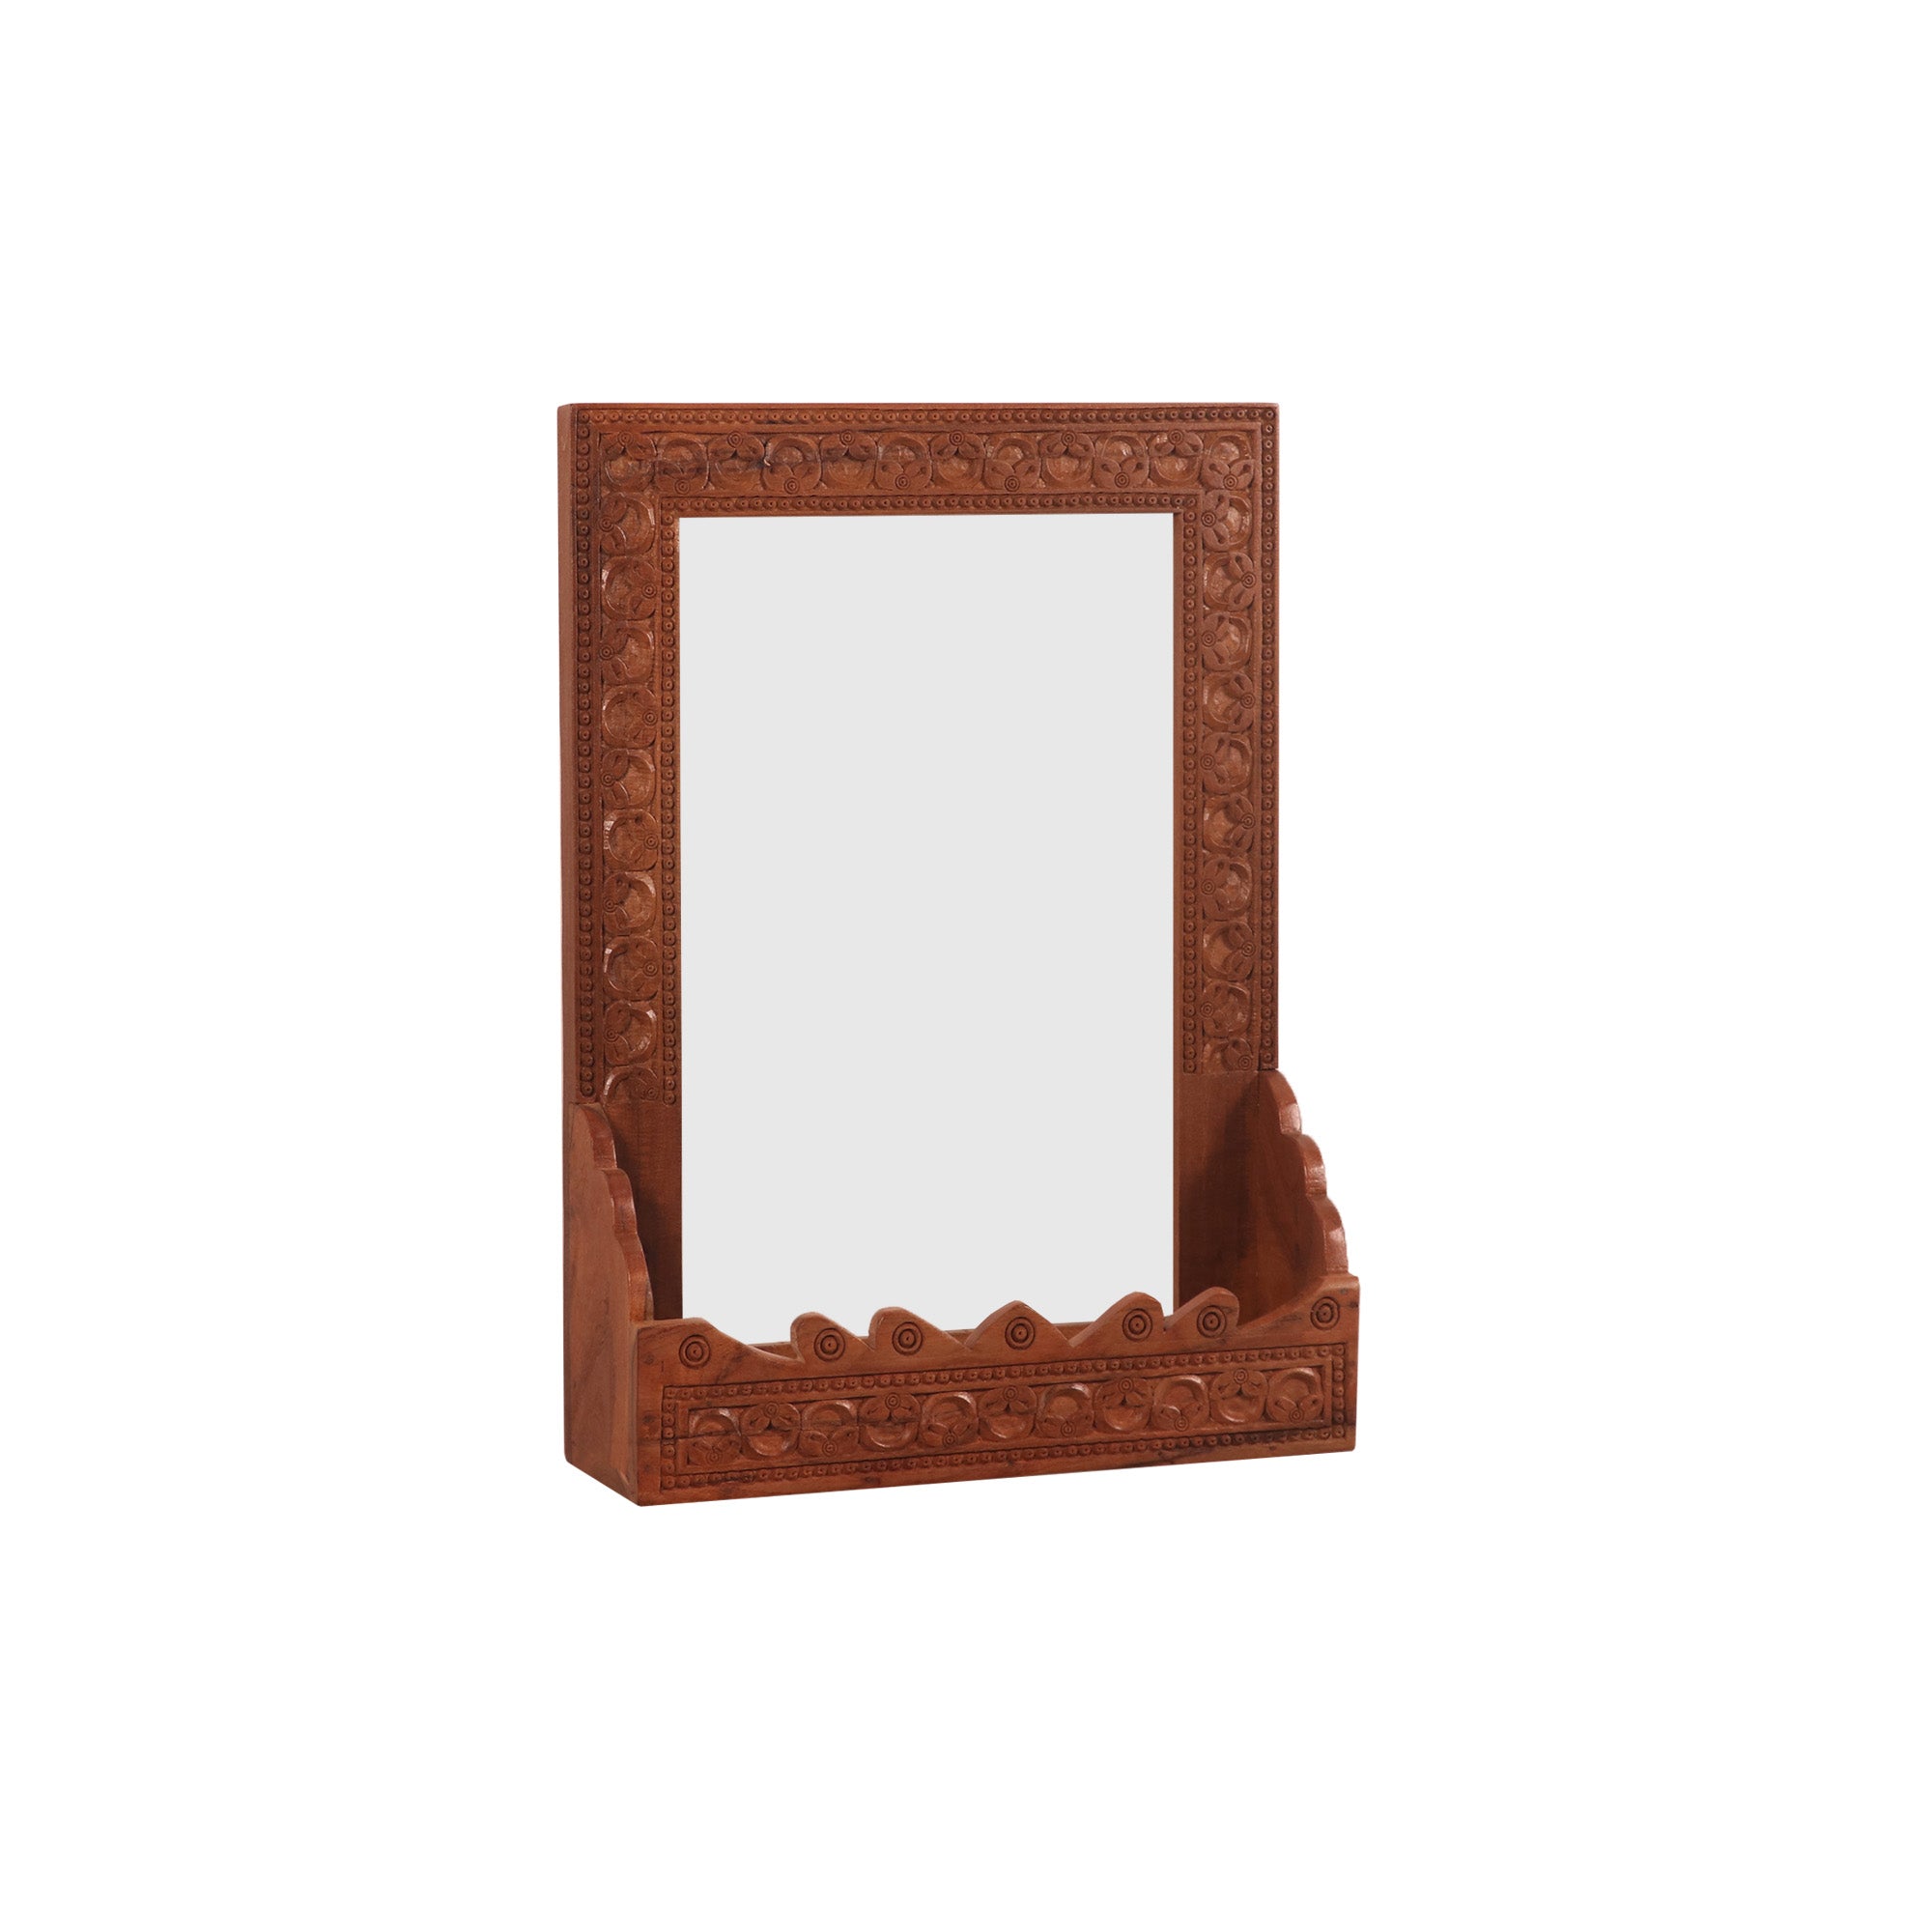 Beautifully Carved mirror with Shelf Mirror